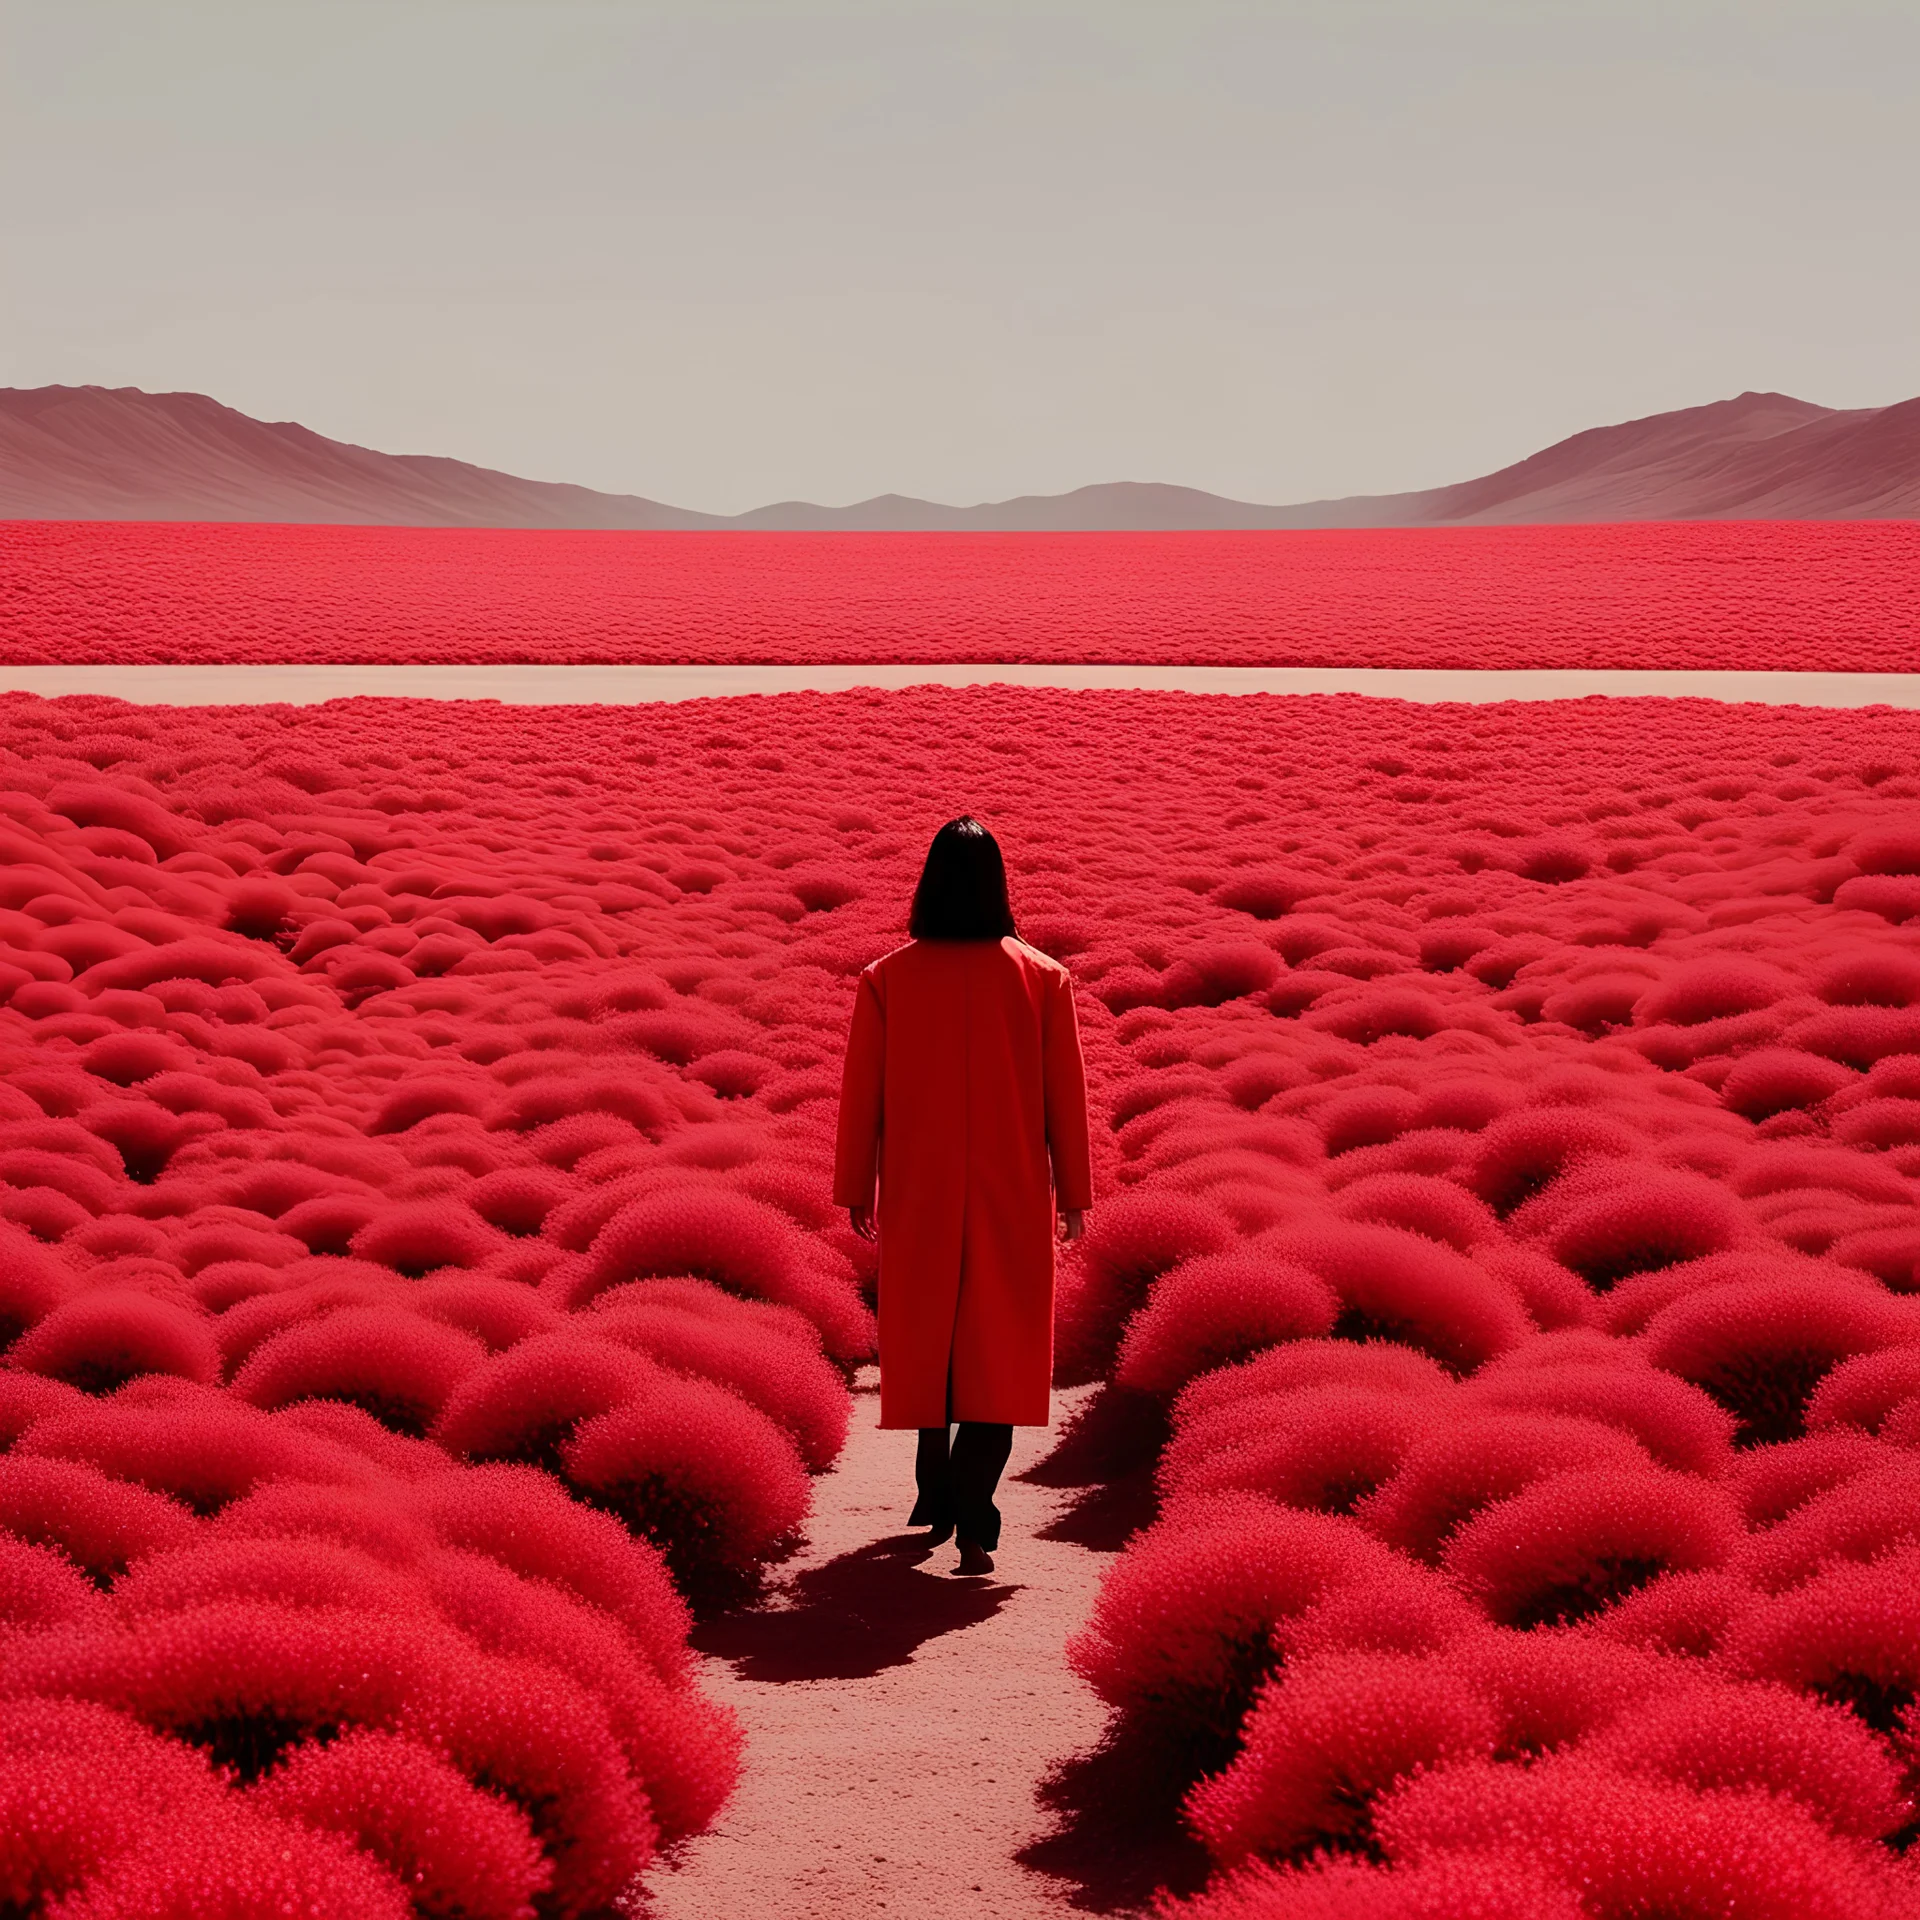 an astronaut walking through a field of red flowers, on a lush fertile alien planet, in a red dream world, lonely landscape, celestial red flowers vibe, on another planet, binspired by Ren Hang, design milk, long black hair, whites, wanderers traveling from afar, trending on artisation, cloning spell, coat pleats, in twin peaks, submarine, by Helen Thomas Dranga, symetry, round-cropped, noire photo